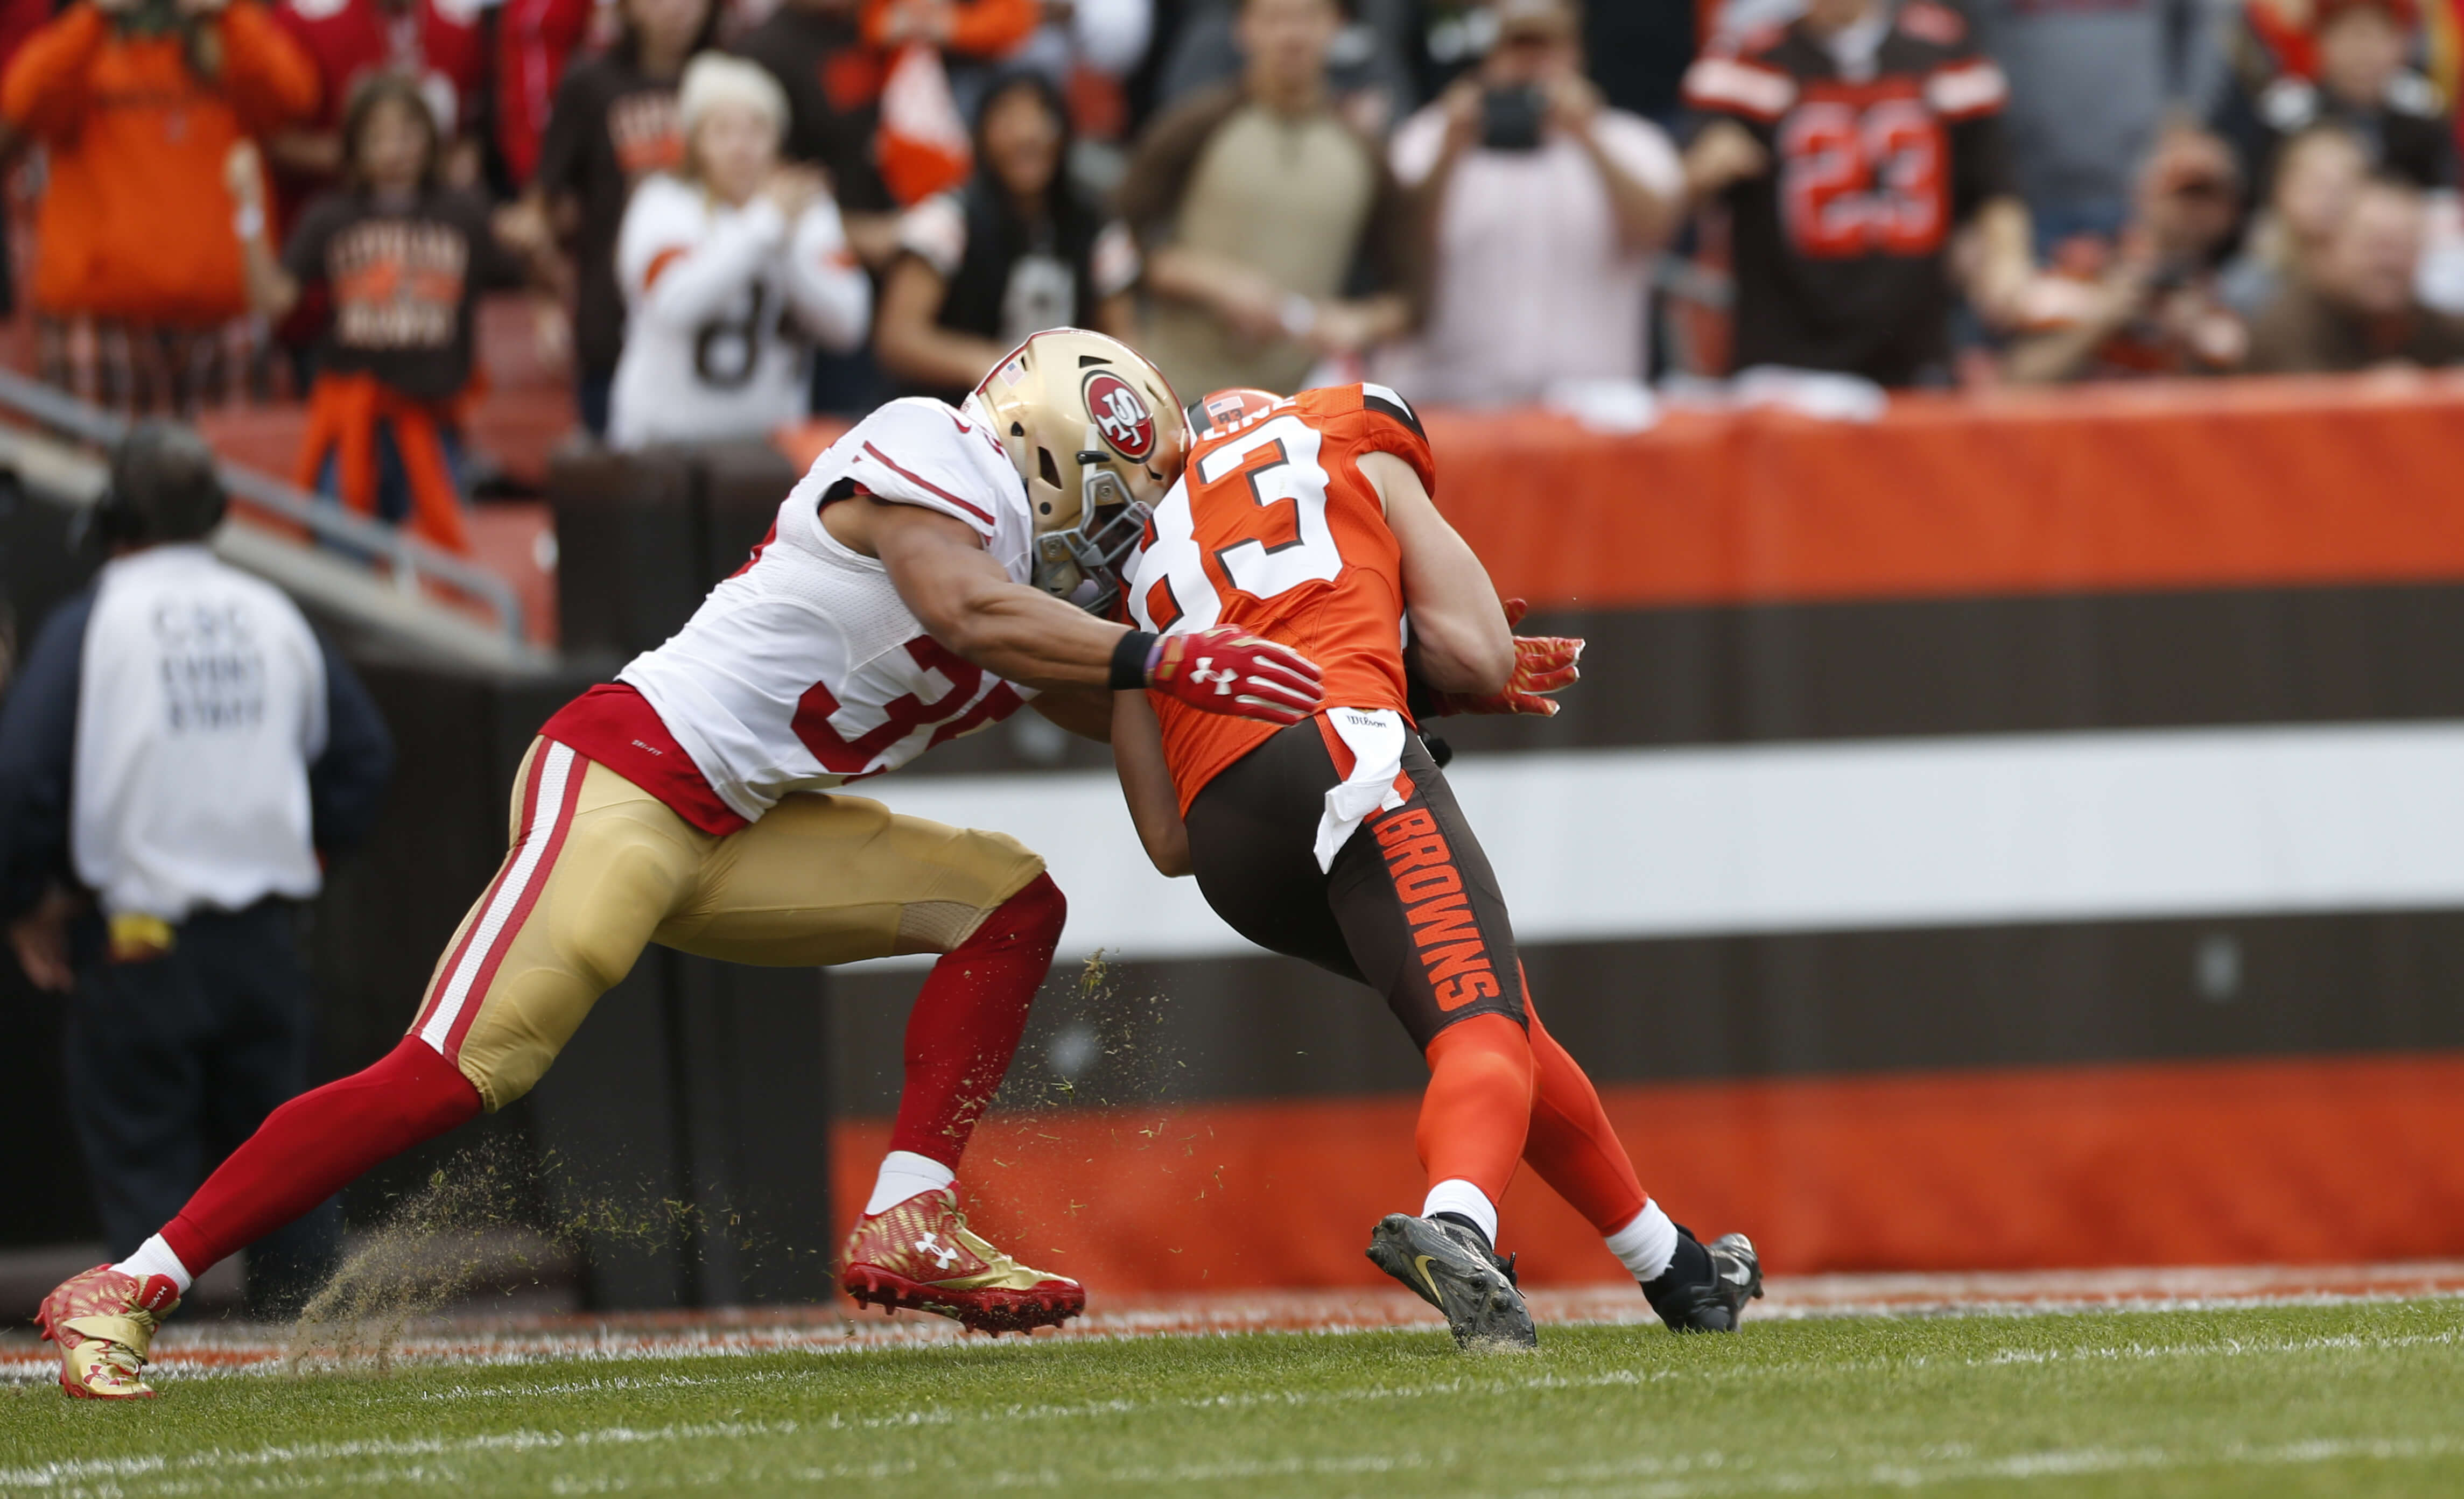 Brian Hartline #83 of the Cleveland Browns fumbles the ball after a big hit by Eric Reid #35 of the San Francisco 49ers during the game at Browns Stadium on Dec. 13, 2015 in Cleveland, Ohio. The Browns defeated the 49ers 24-10.